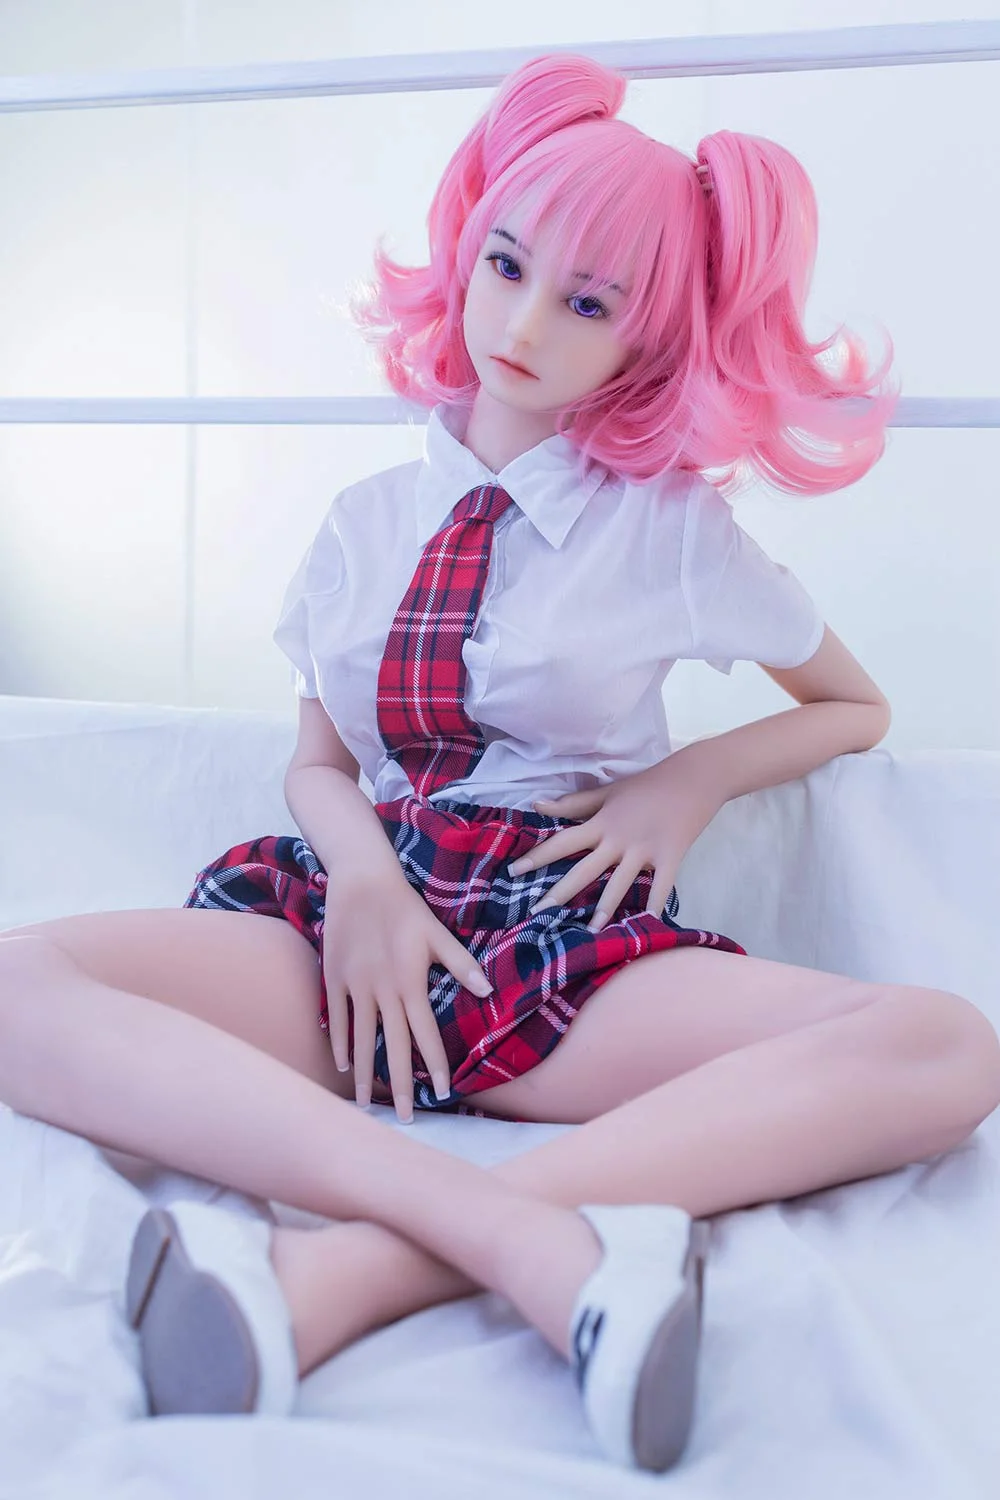 Mini sex doll sitting on the floor with legs crossed and touching skirt